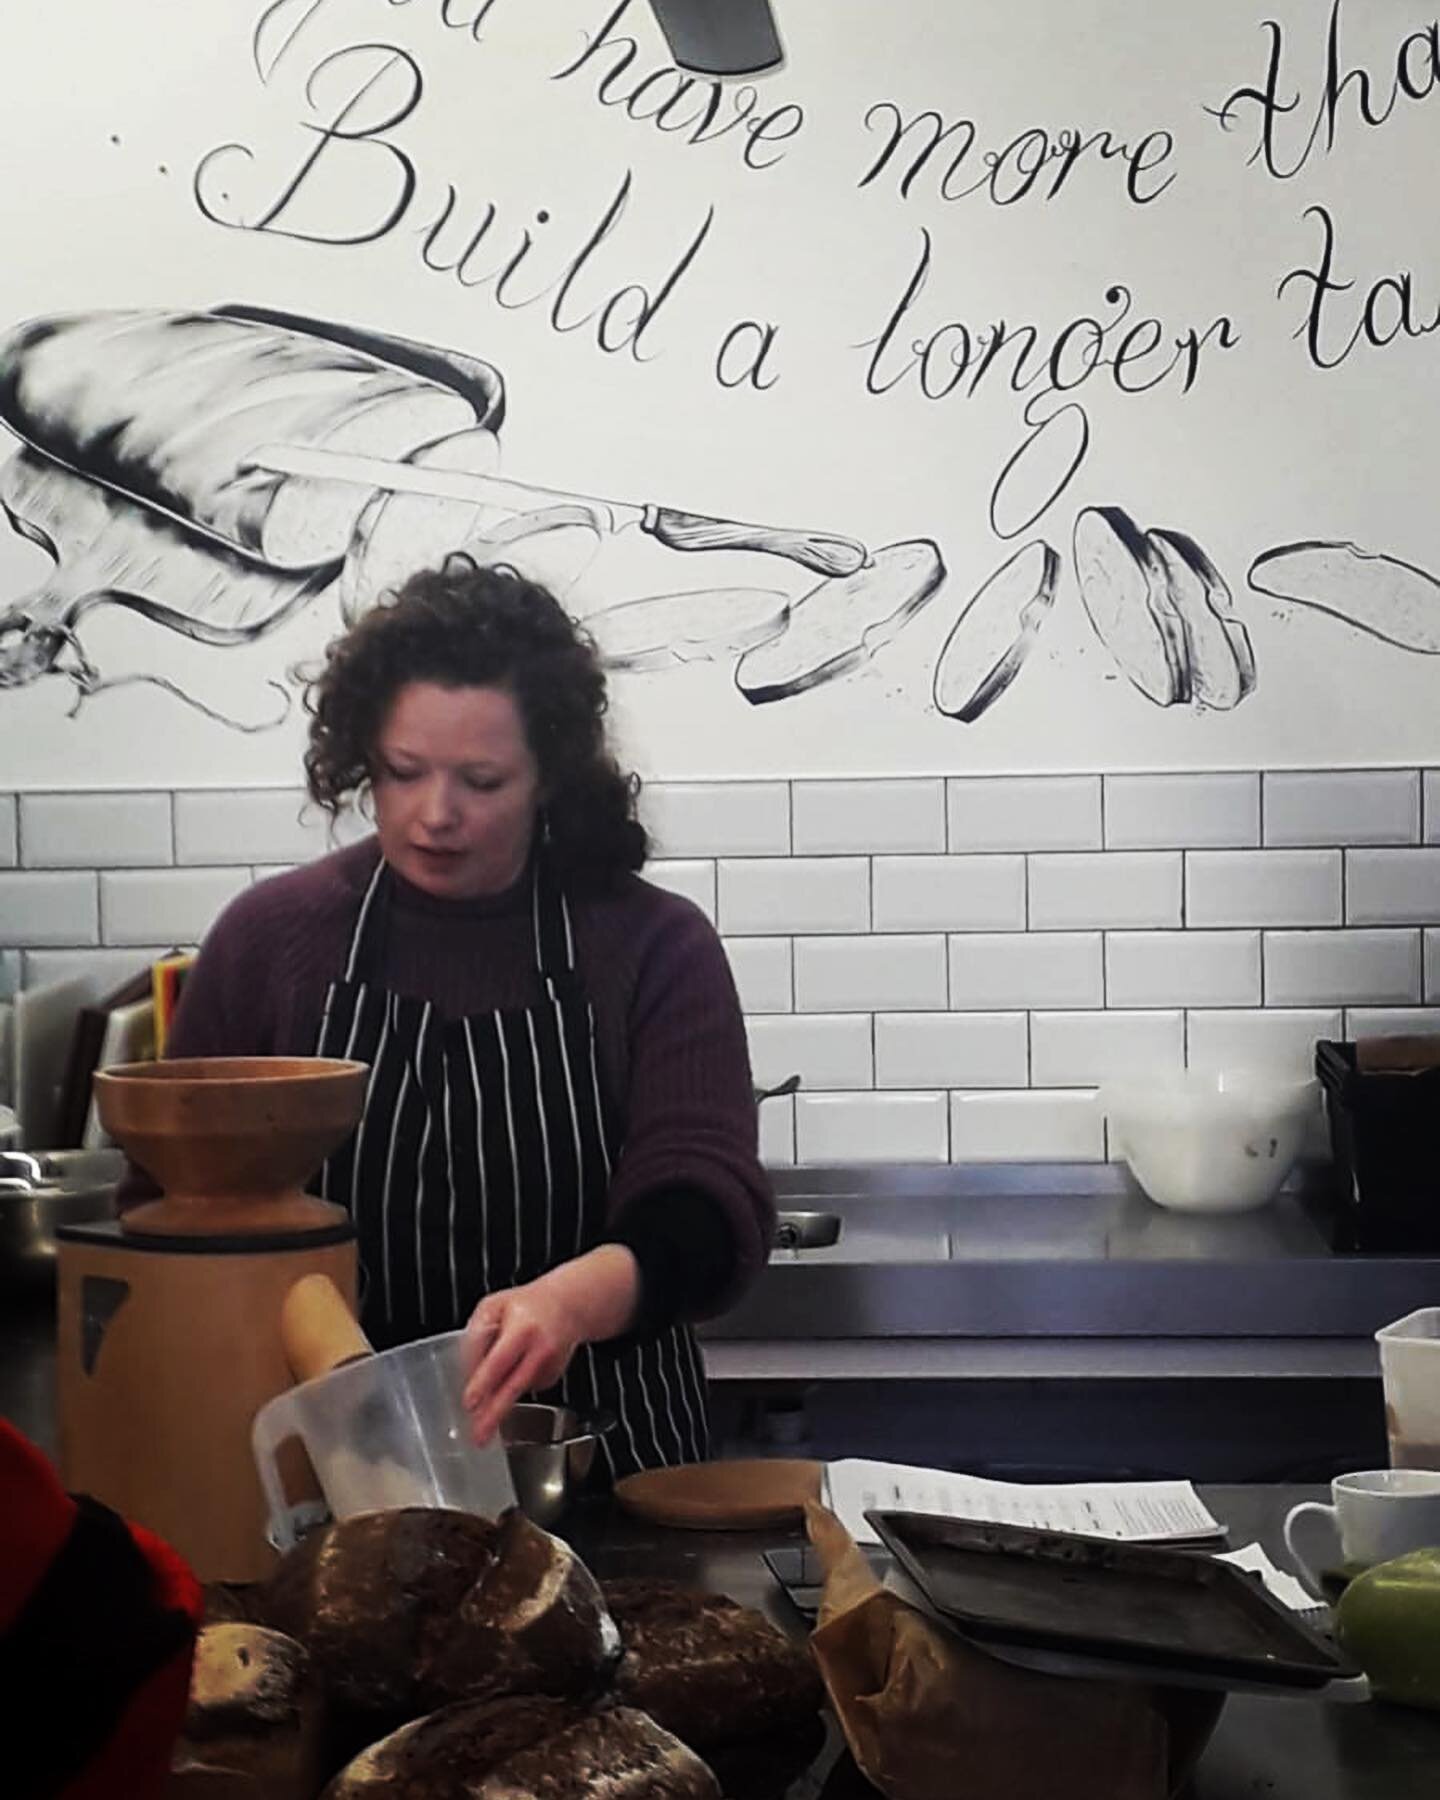 Here teaching my love of sourdough yesterday at the brilliant @coexistcommunitykitchen in Bristol. Filled the back of the van with as much of the farm as It could carry and a healthy amount of Tupperware and brought it all to bread class. Thanks to a